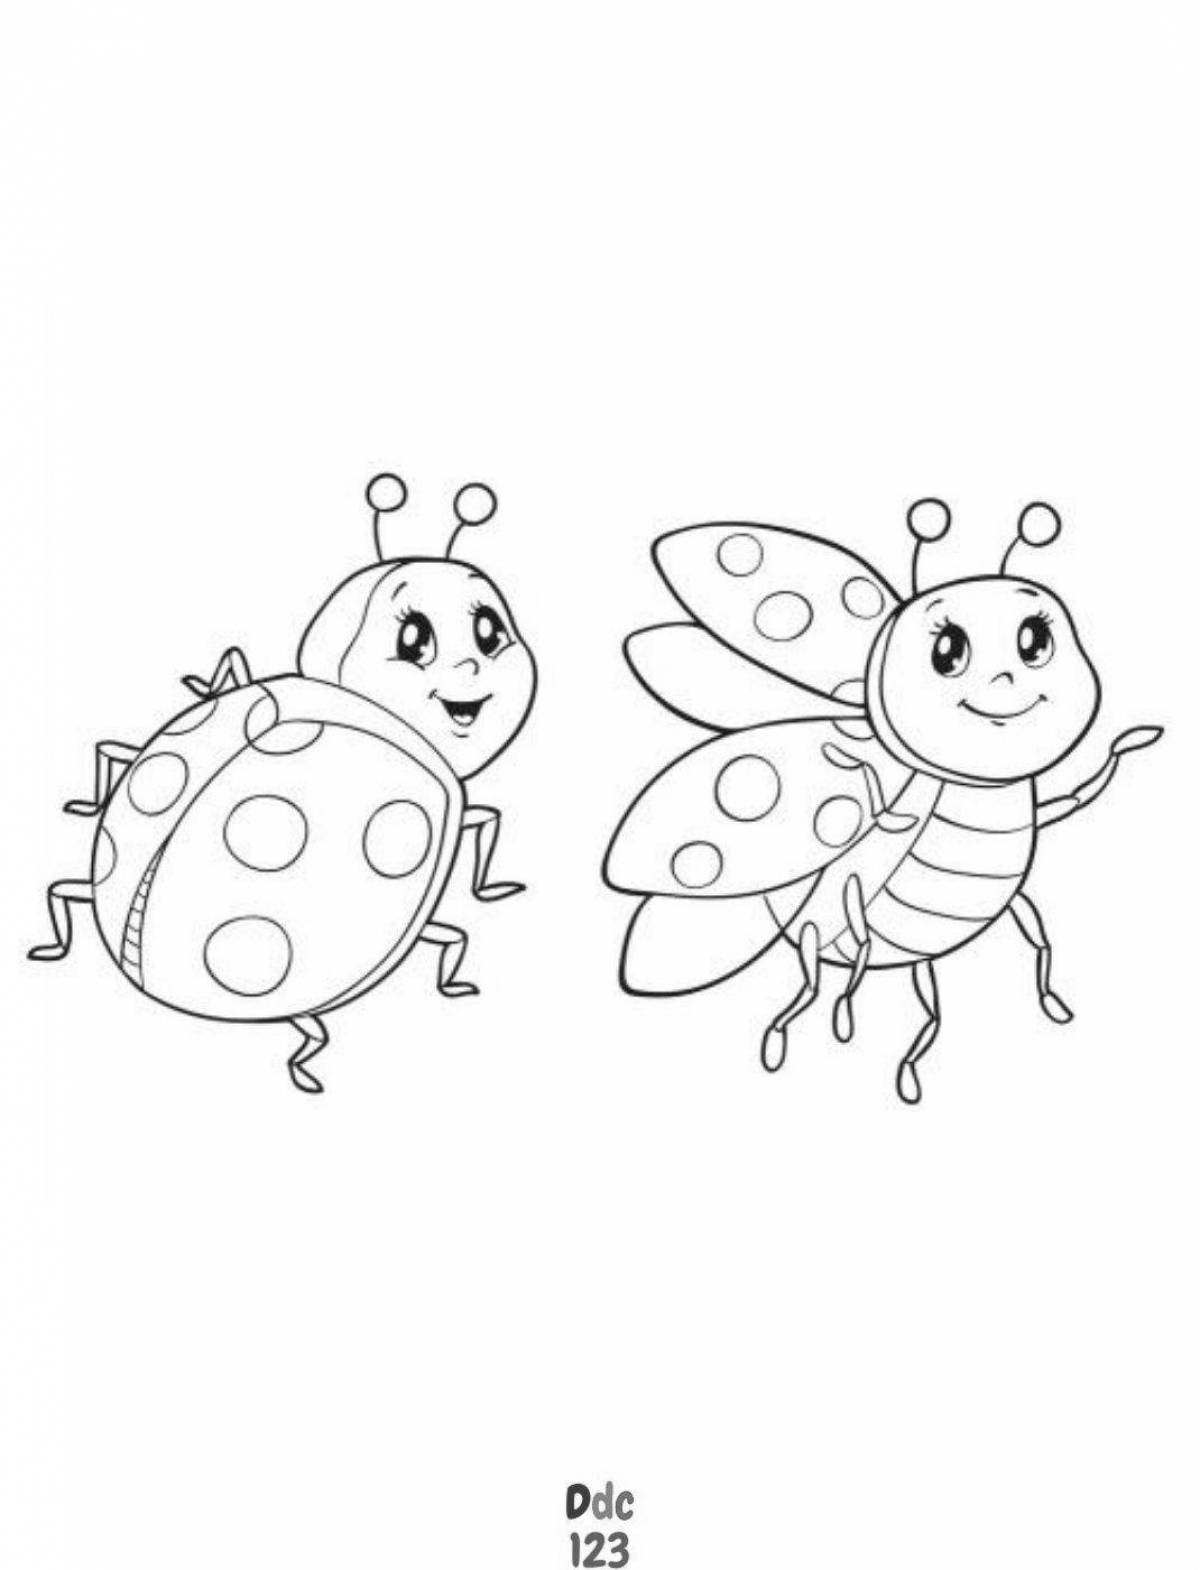 A funny drawing of a ladybug